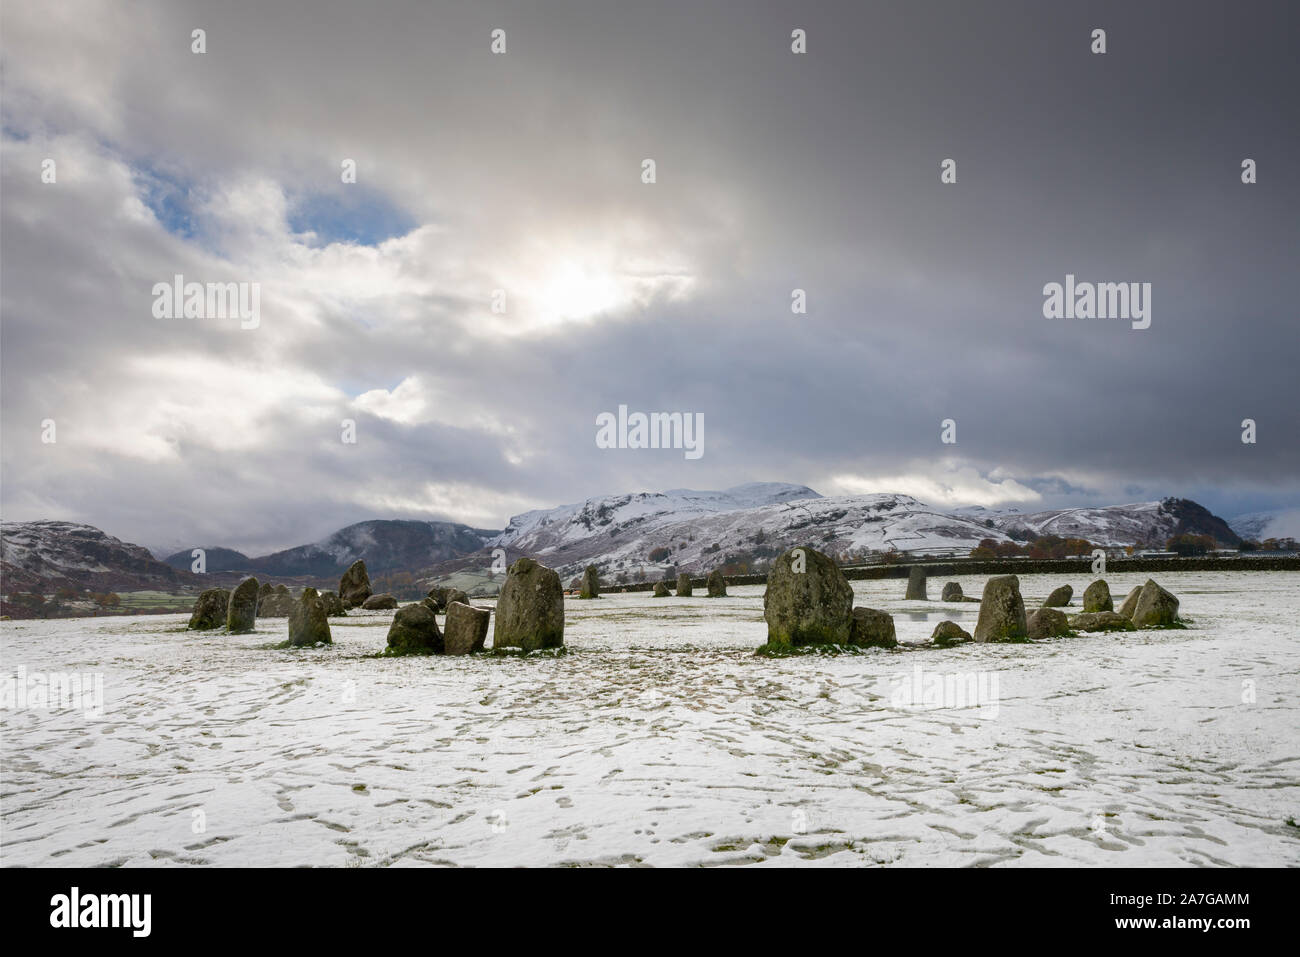 Snow at Castlerigg Stone Circle in the Lake District National Park, Cumbria, England. Stock Photo